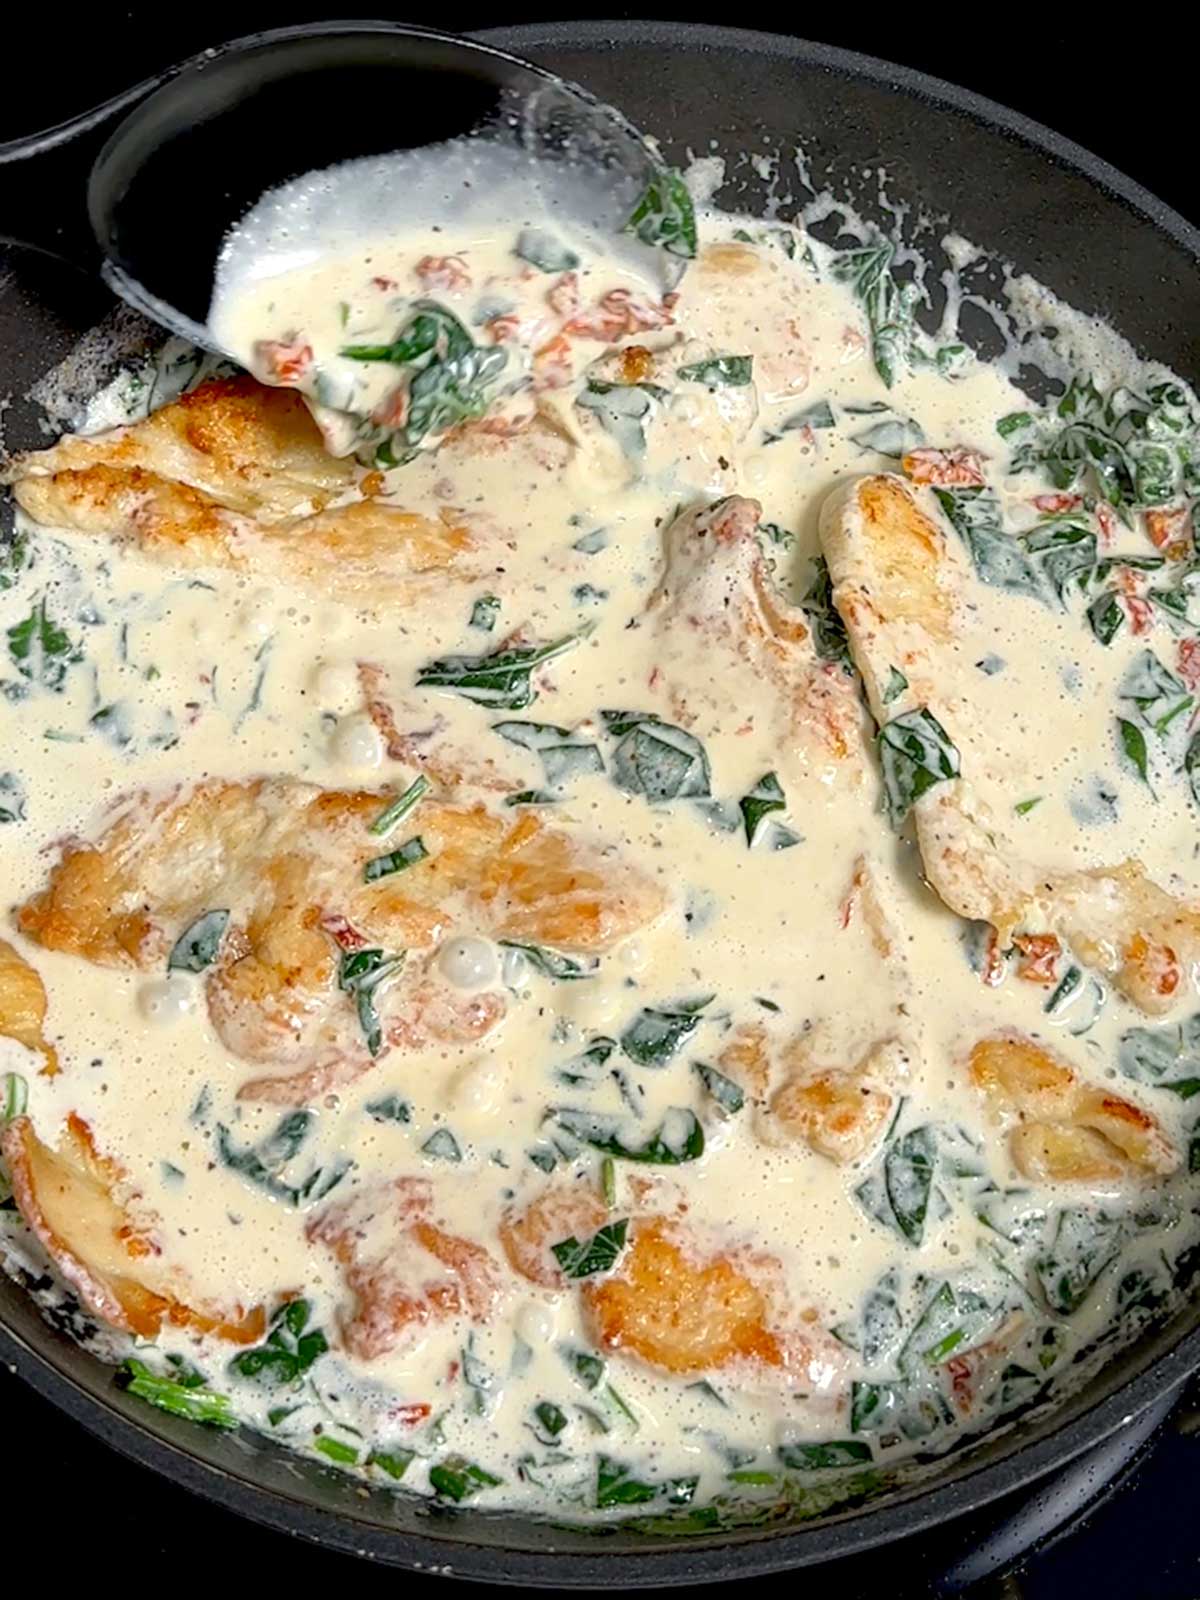 Cooking the chicken in the creamy sauce.